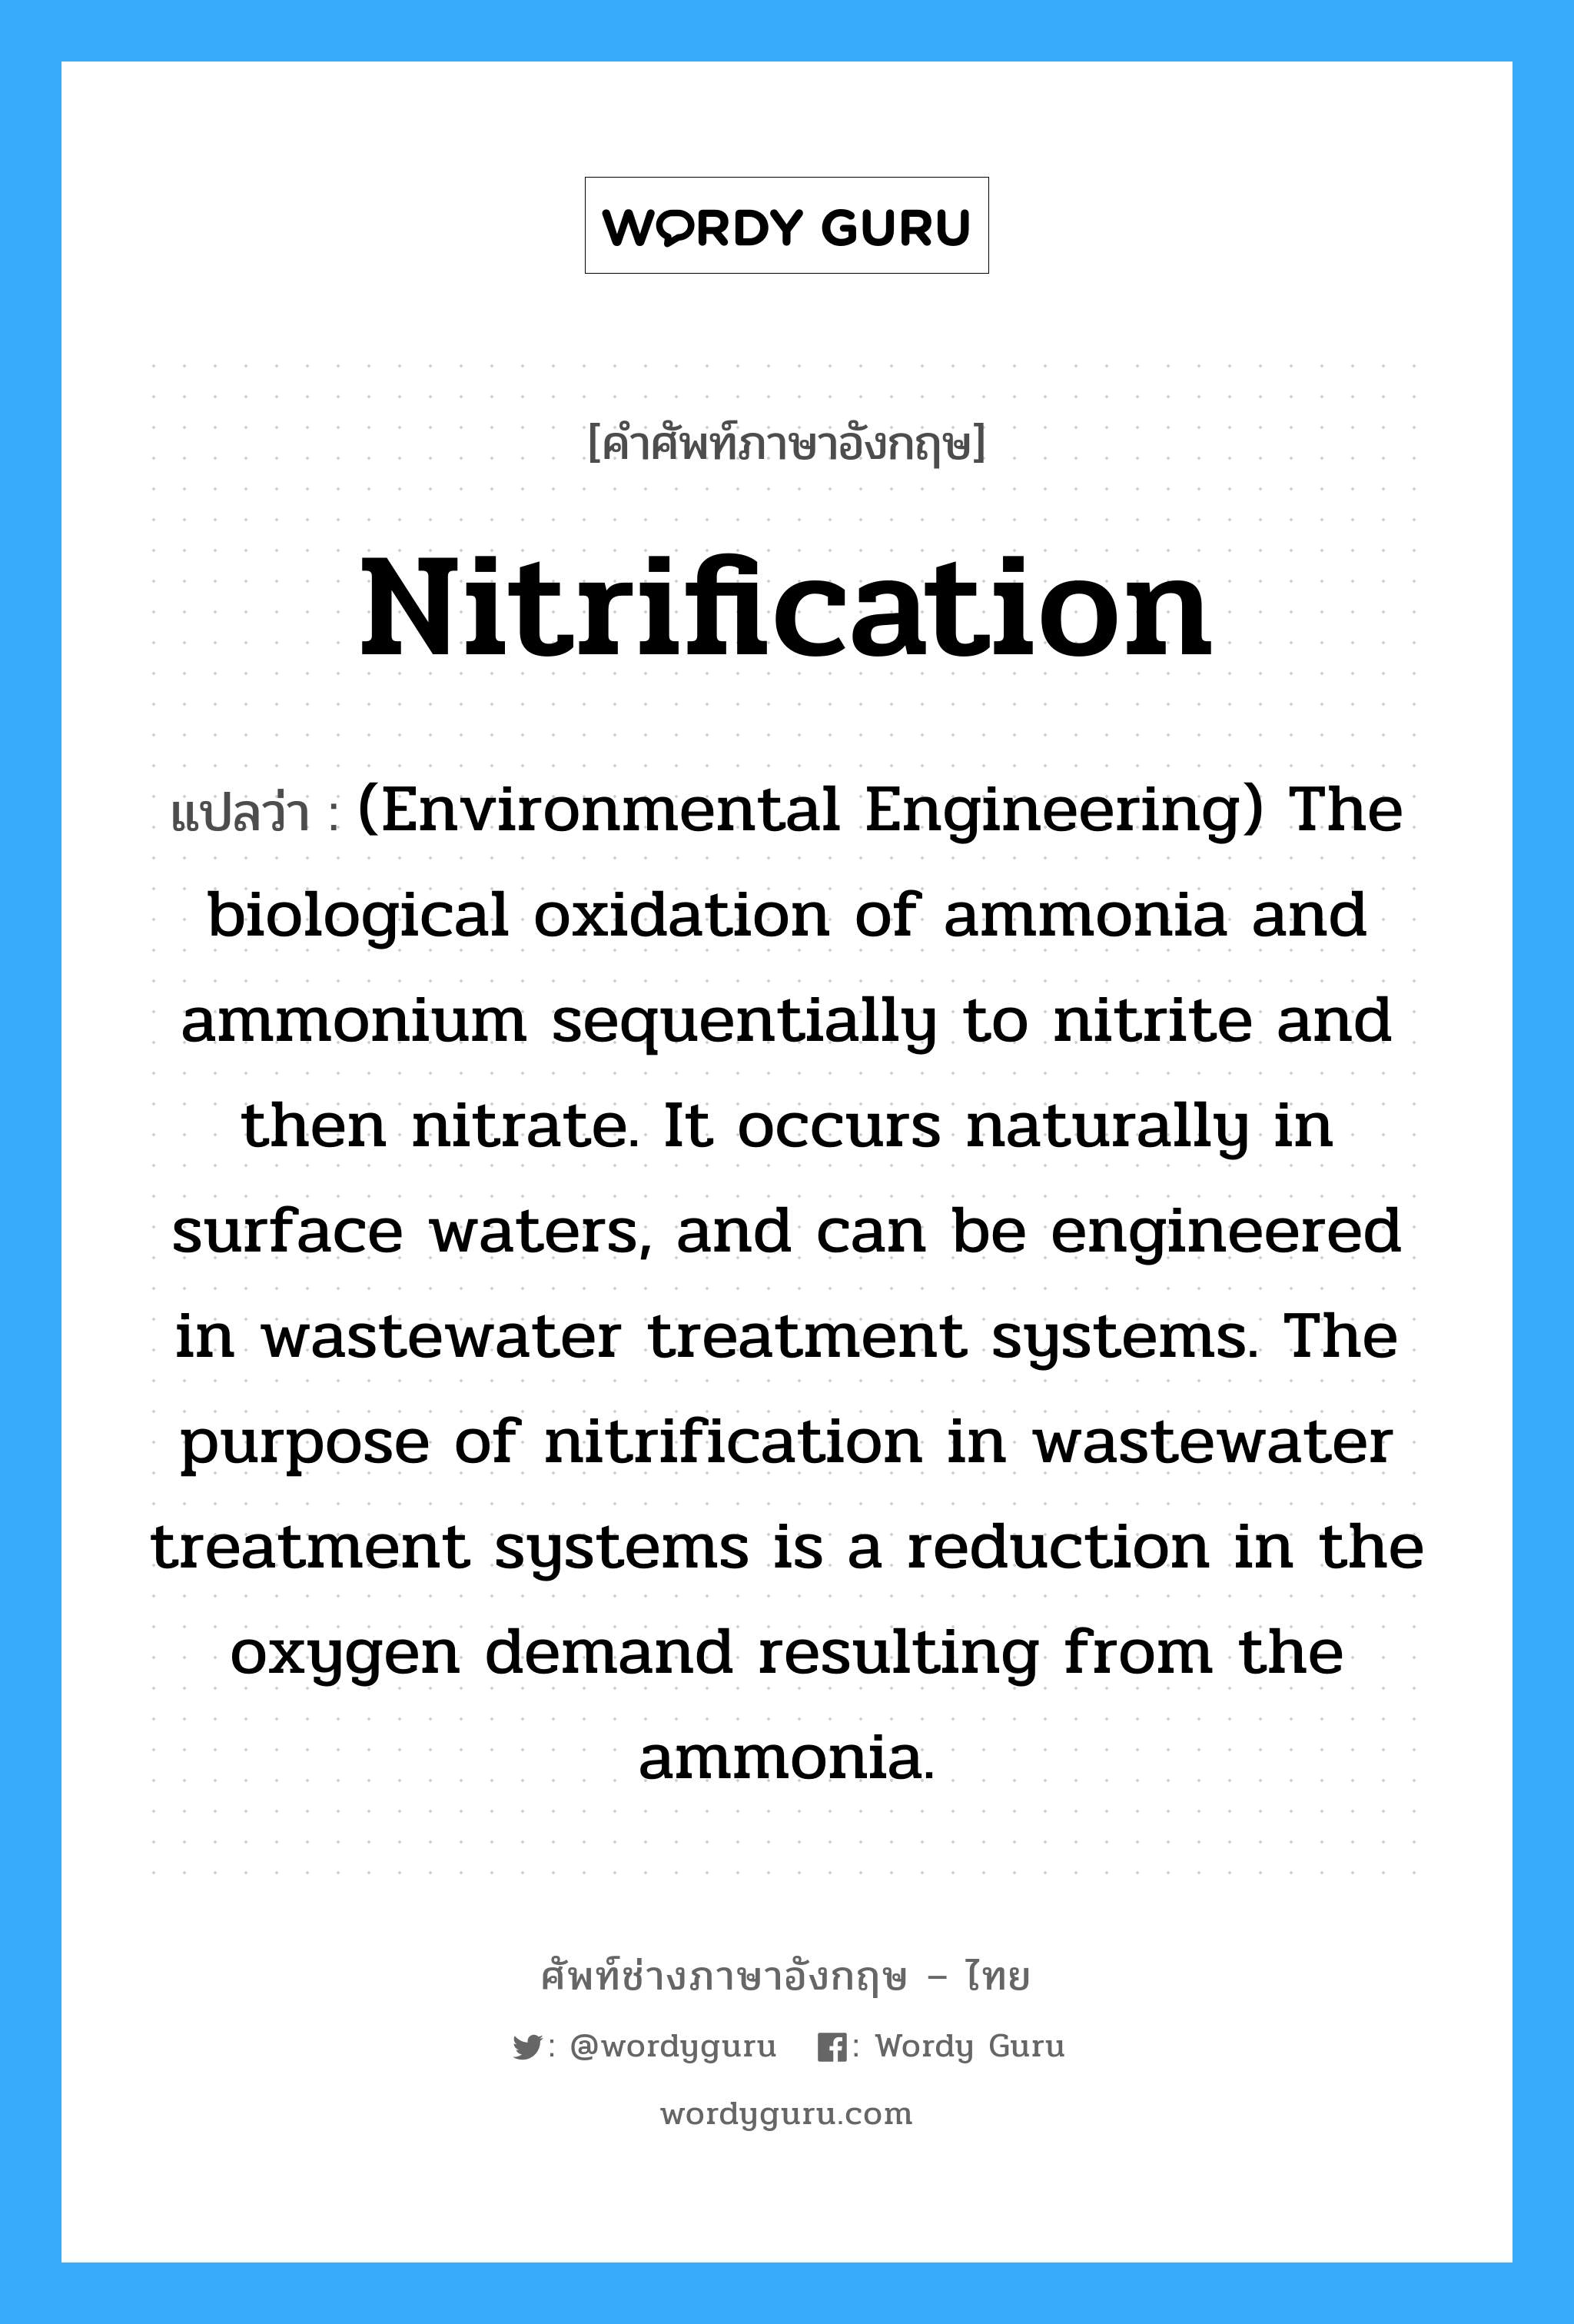 Nitrification แปลว่า?, คำศัพท์ช่างภาษาอังกฤษ - ไทย Nitrification คำศัพท์ภาษาอังกฤษ Nitrification แปลว่า (Environmental Engineering) The biological oxidation of ammonia and ammonium sequentially to nitrite and then nitrate. It occurs naturally in surface waters, and can be engineered in wastewater treatment systems. The purpose of nitrification in wastewater treatment systems is a reduction in the oxygen demand resulting from the ammonia.